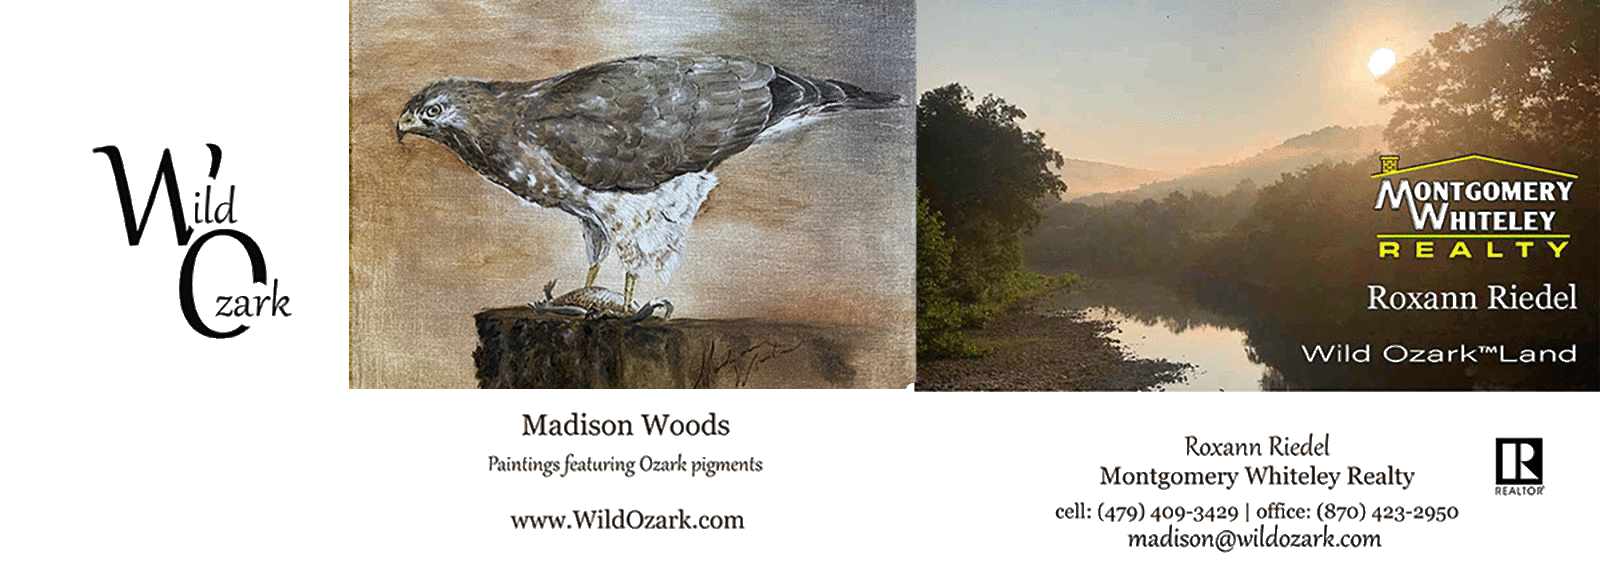 Roxann Riedel is a real estate agent with Montgomery Whiteley Realty. She's also an artist painting under the pen name 'Madison Woods'.